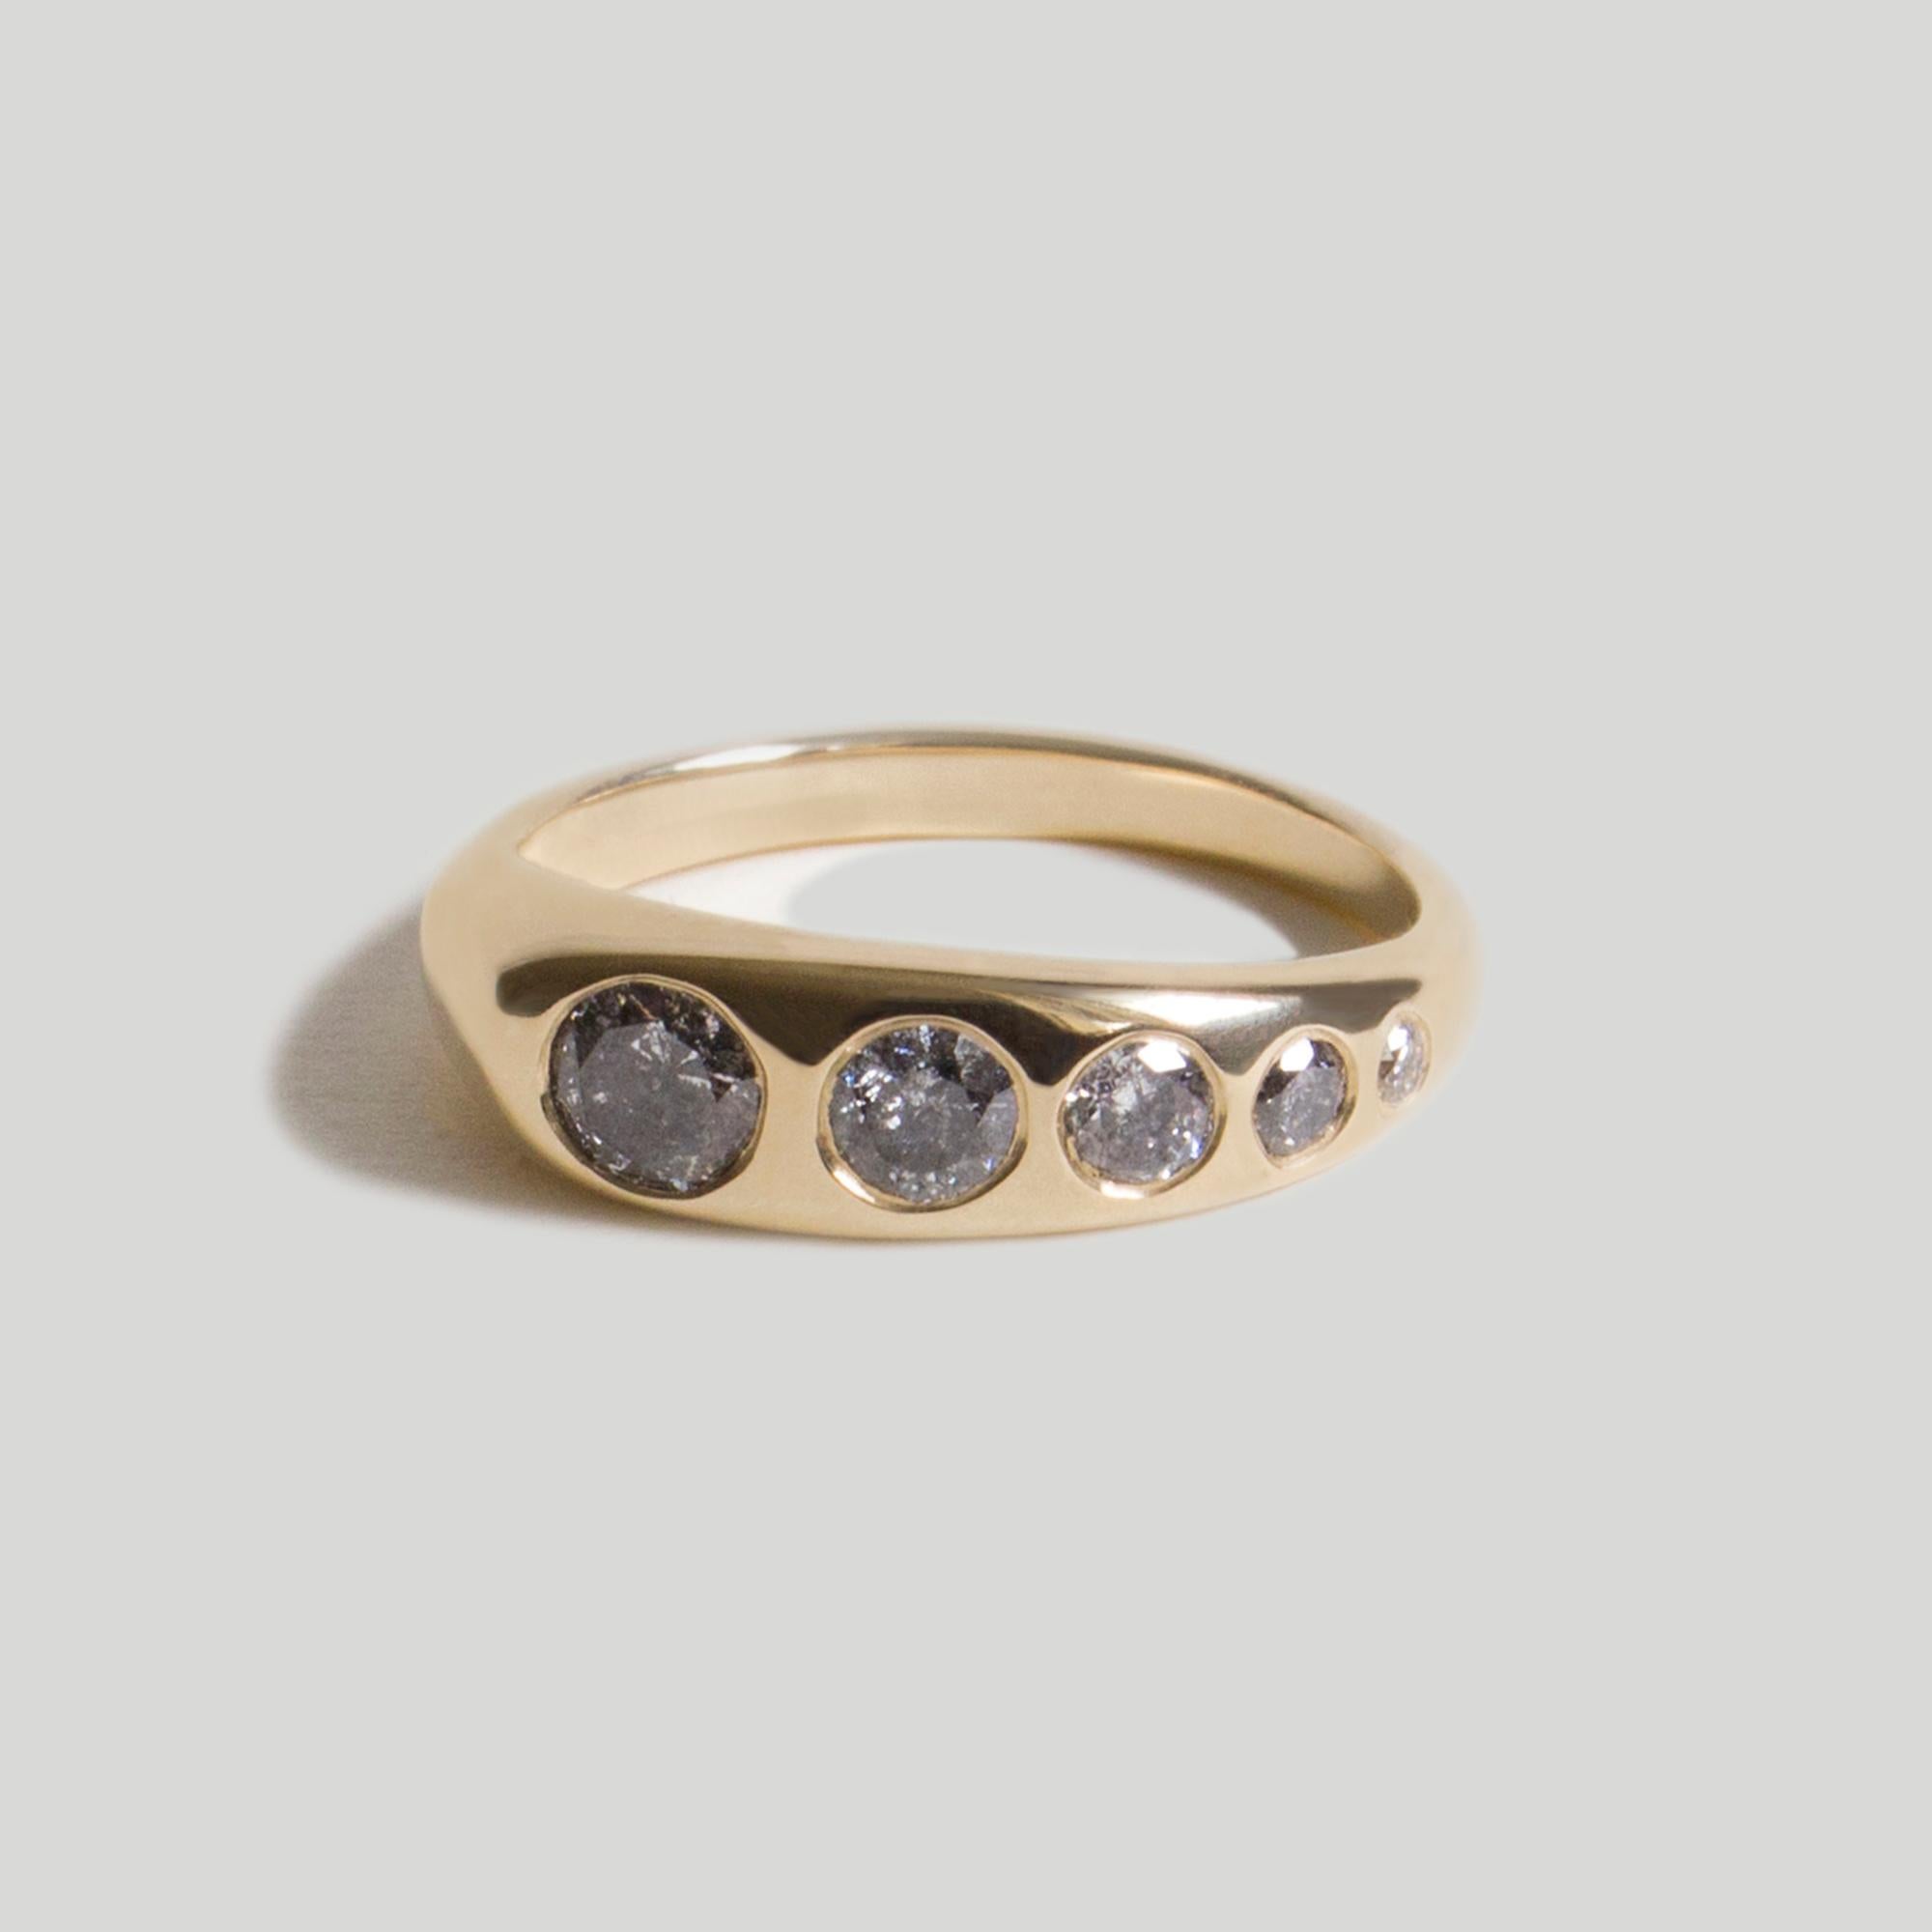 The Queen of them all: Lila Suprima. A diamond-encrusted version of the original Lila Ring featuring approximately 0.7 carats worth of sultry greys in this hyper-modern piece.

STONES
◘  Five sizes of flush-set, brilliant-cut Salt & Pepper Grey